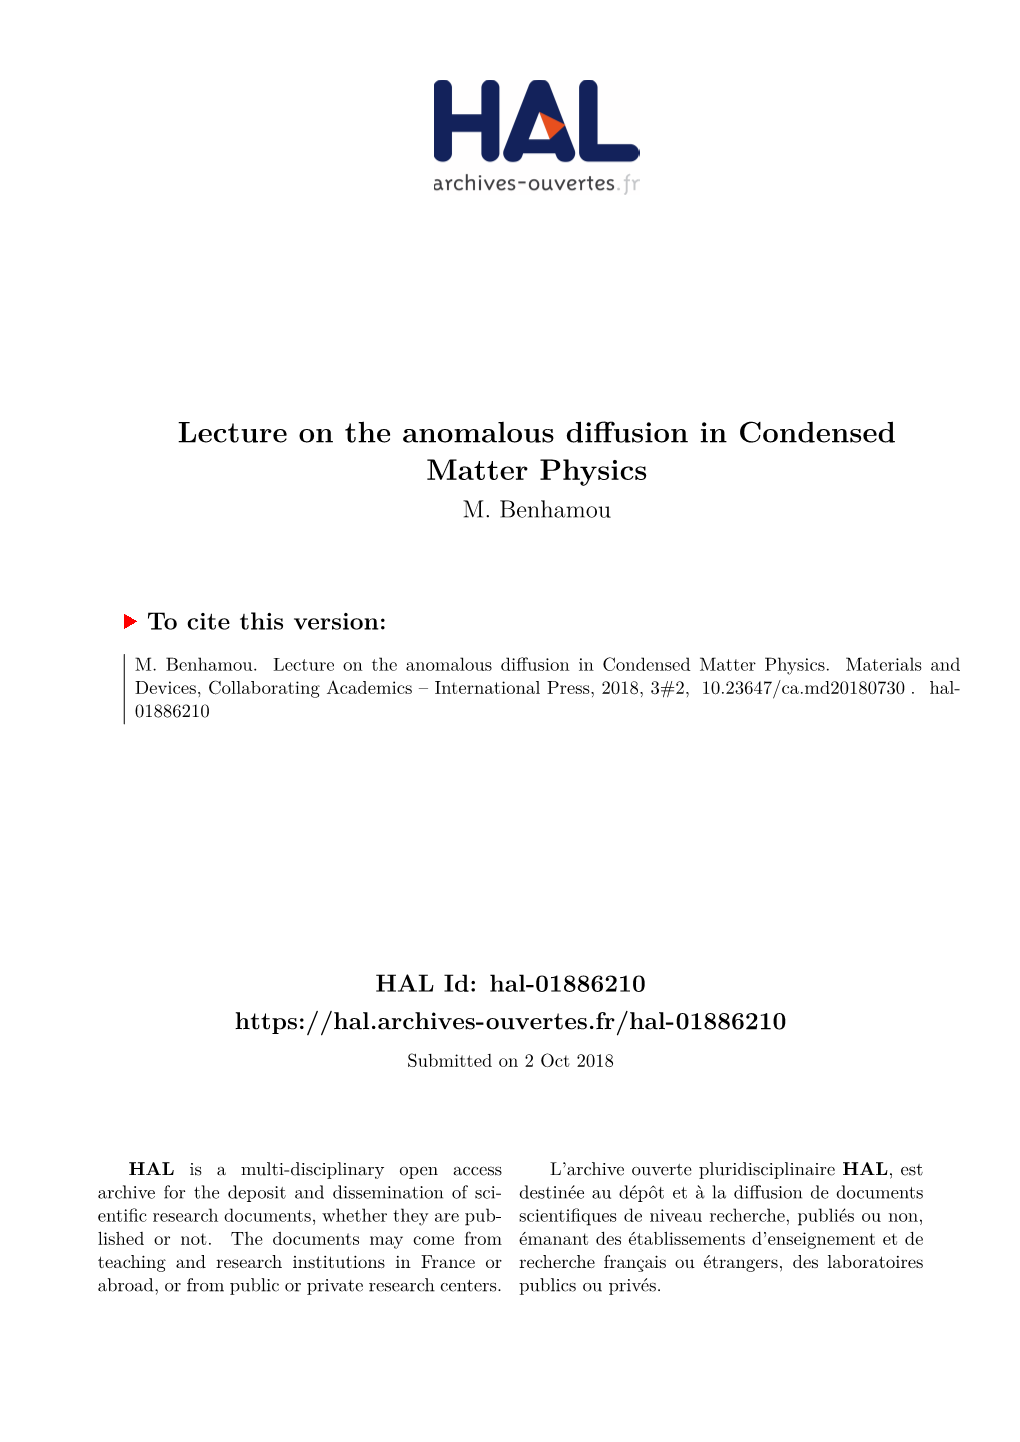 Lecture on the Anomalous Diffusion in Condensed Matter Physics M